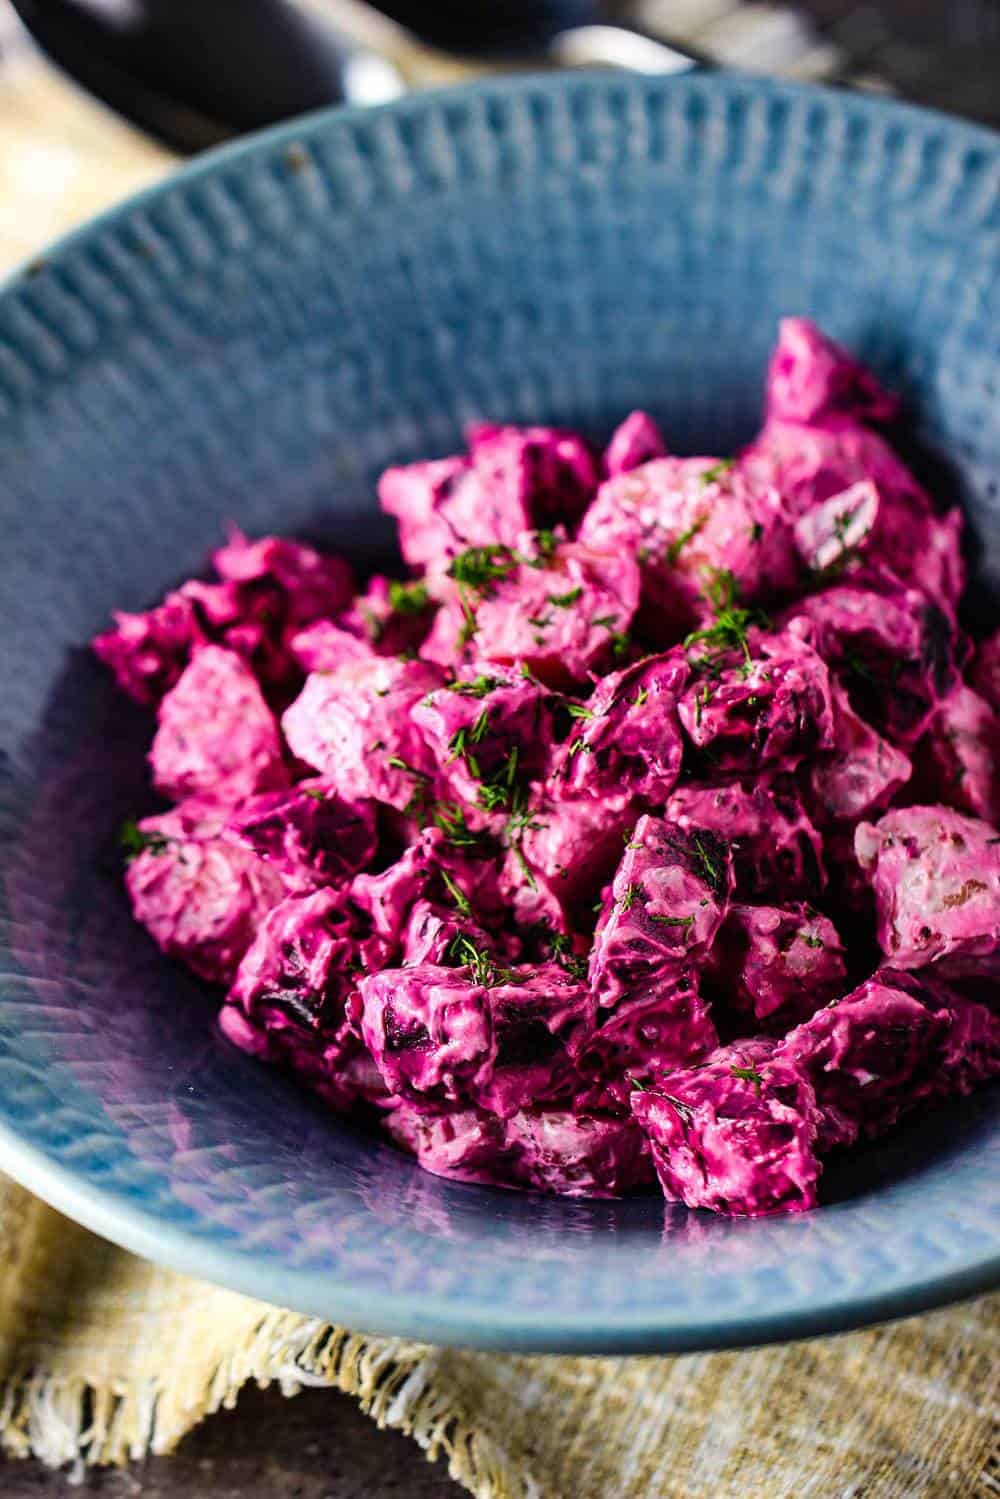 Beet and potato salad with dill dressing